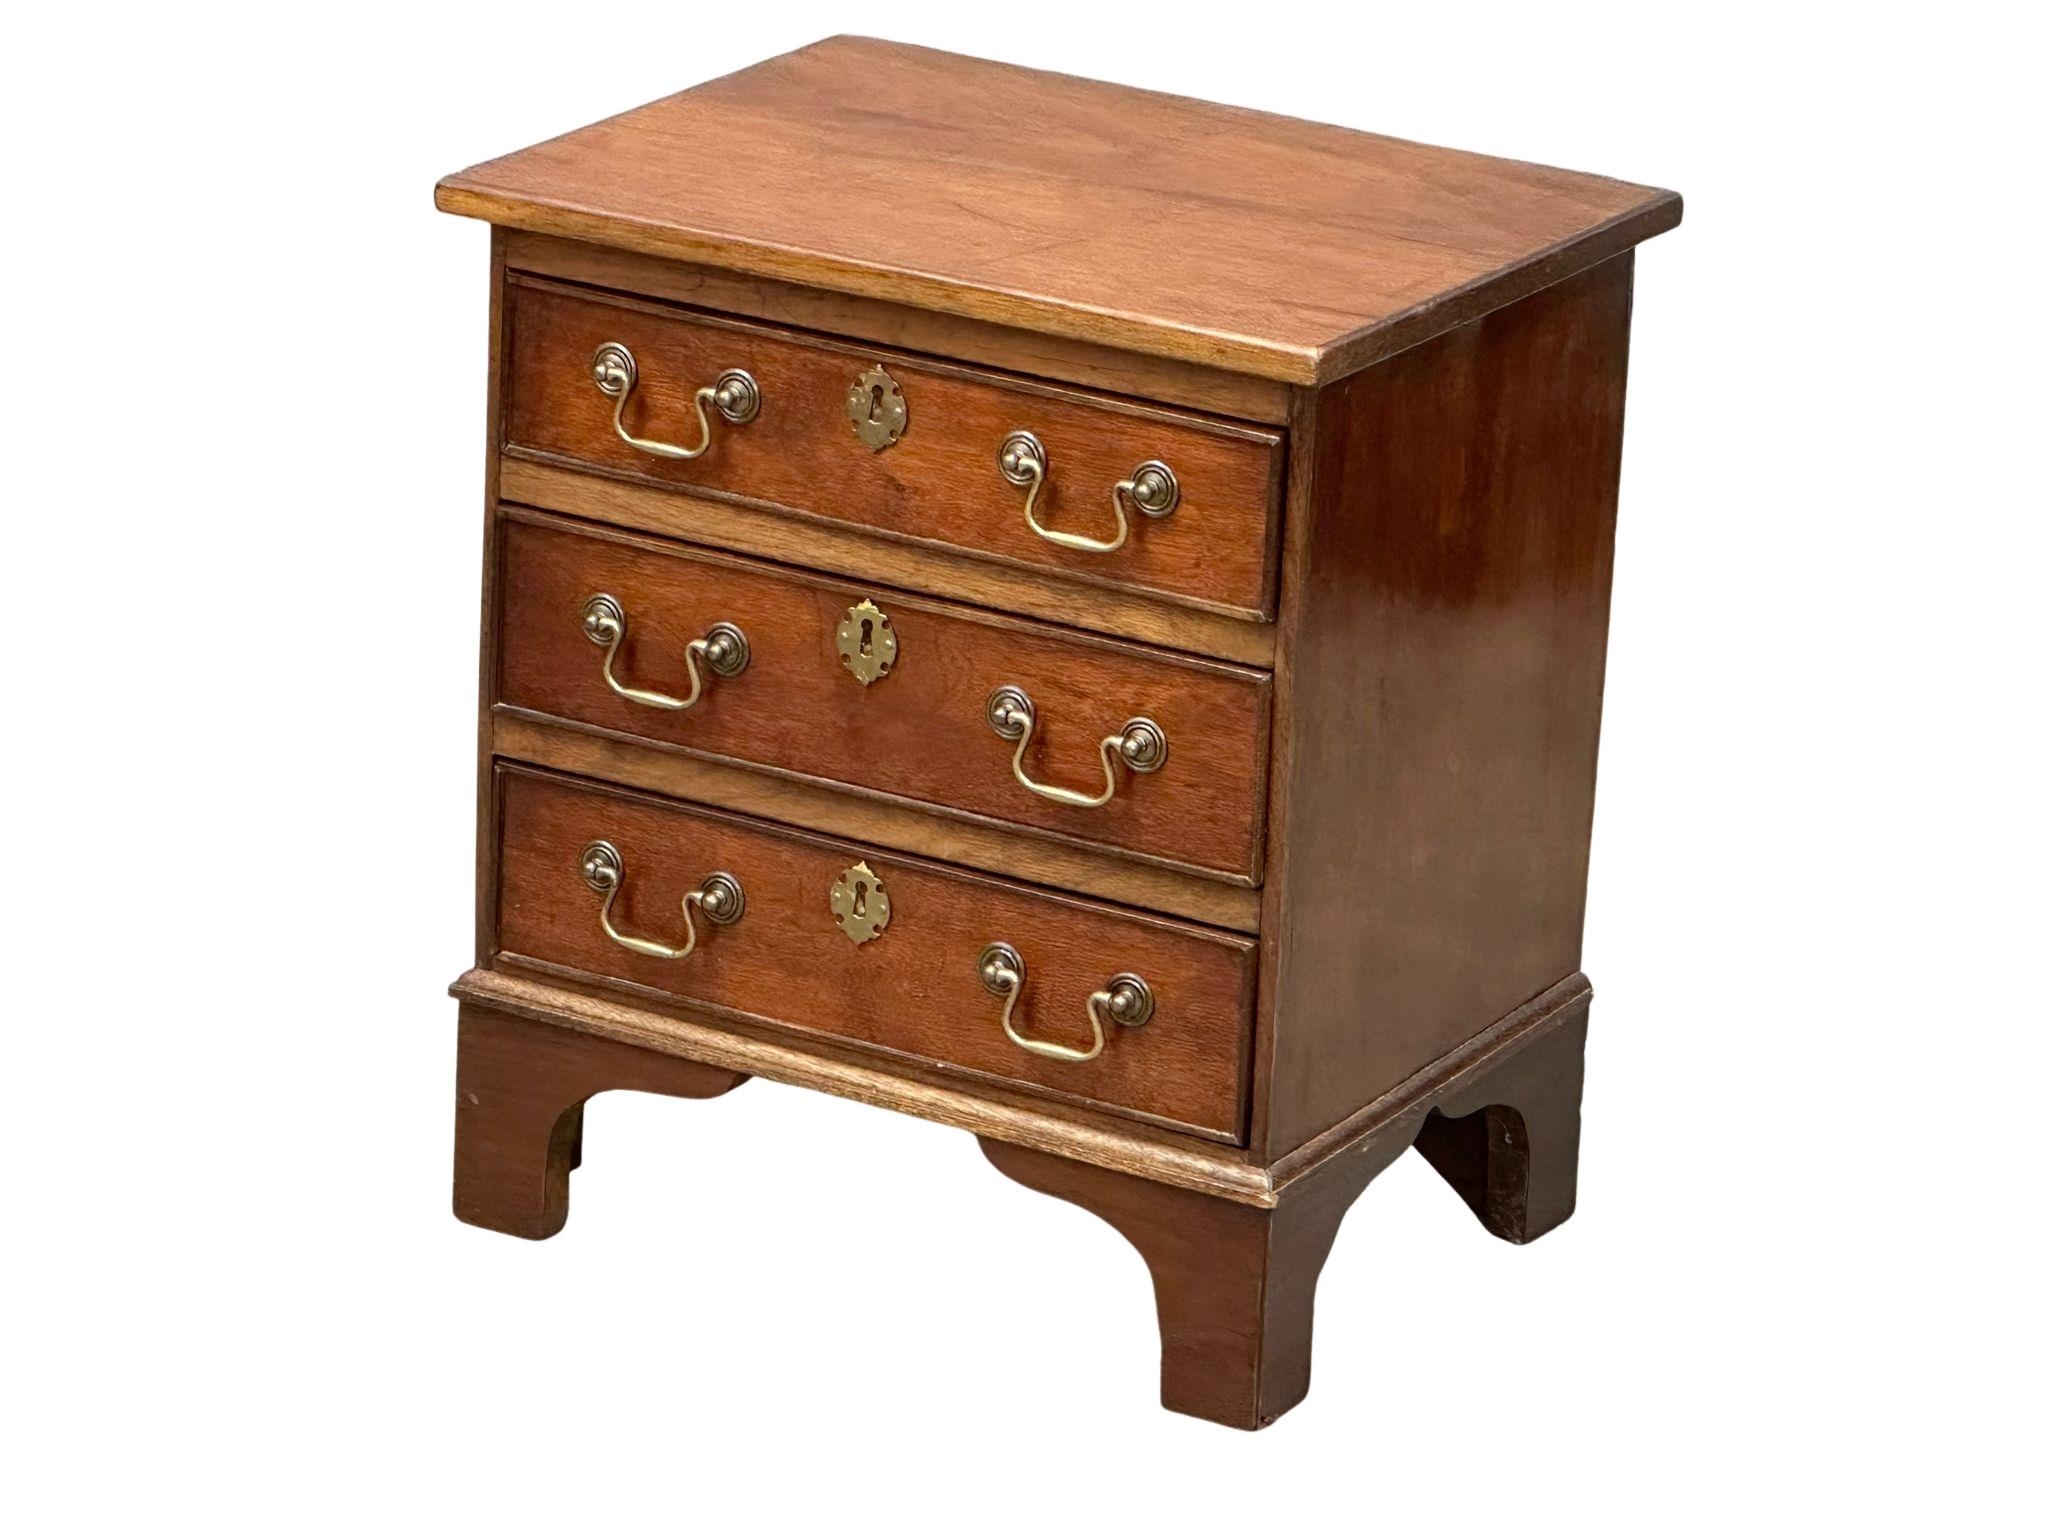 A small Georgian style chest of drawers, 46cm x 36cm x 52cm - Image 3 of 8